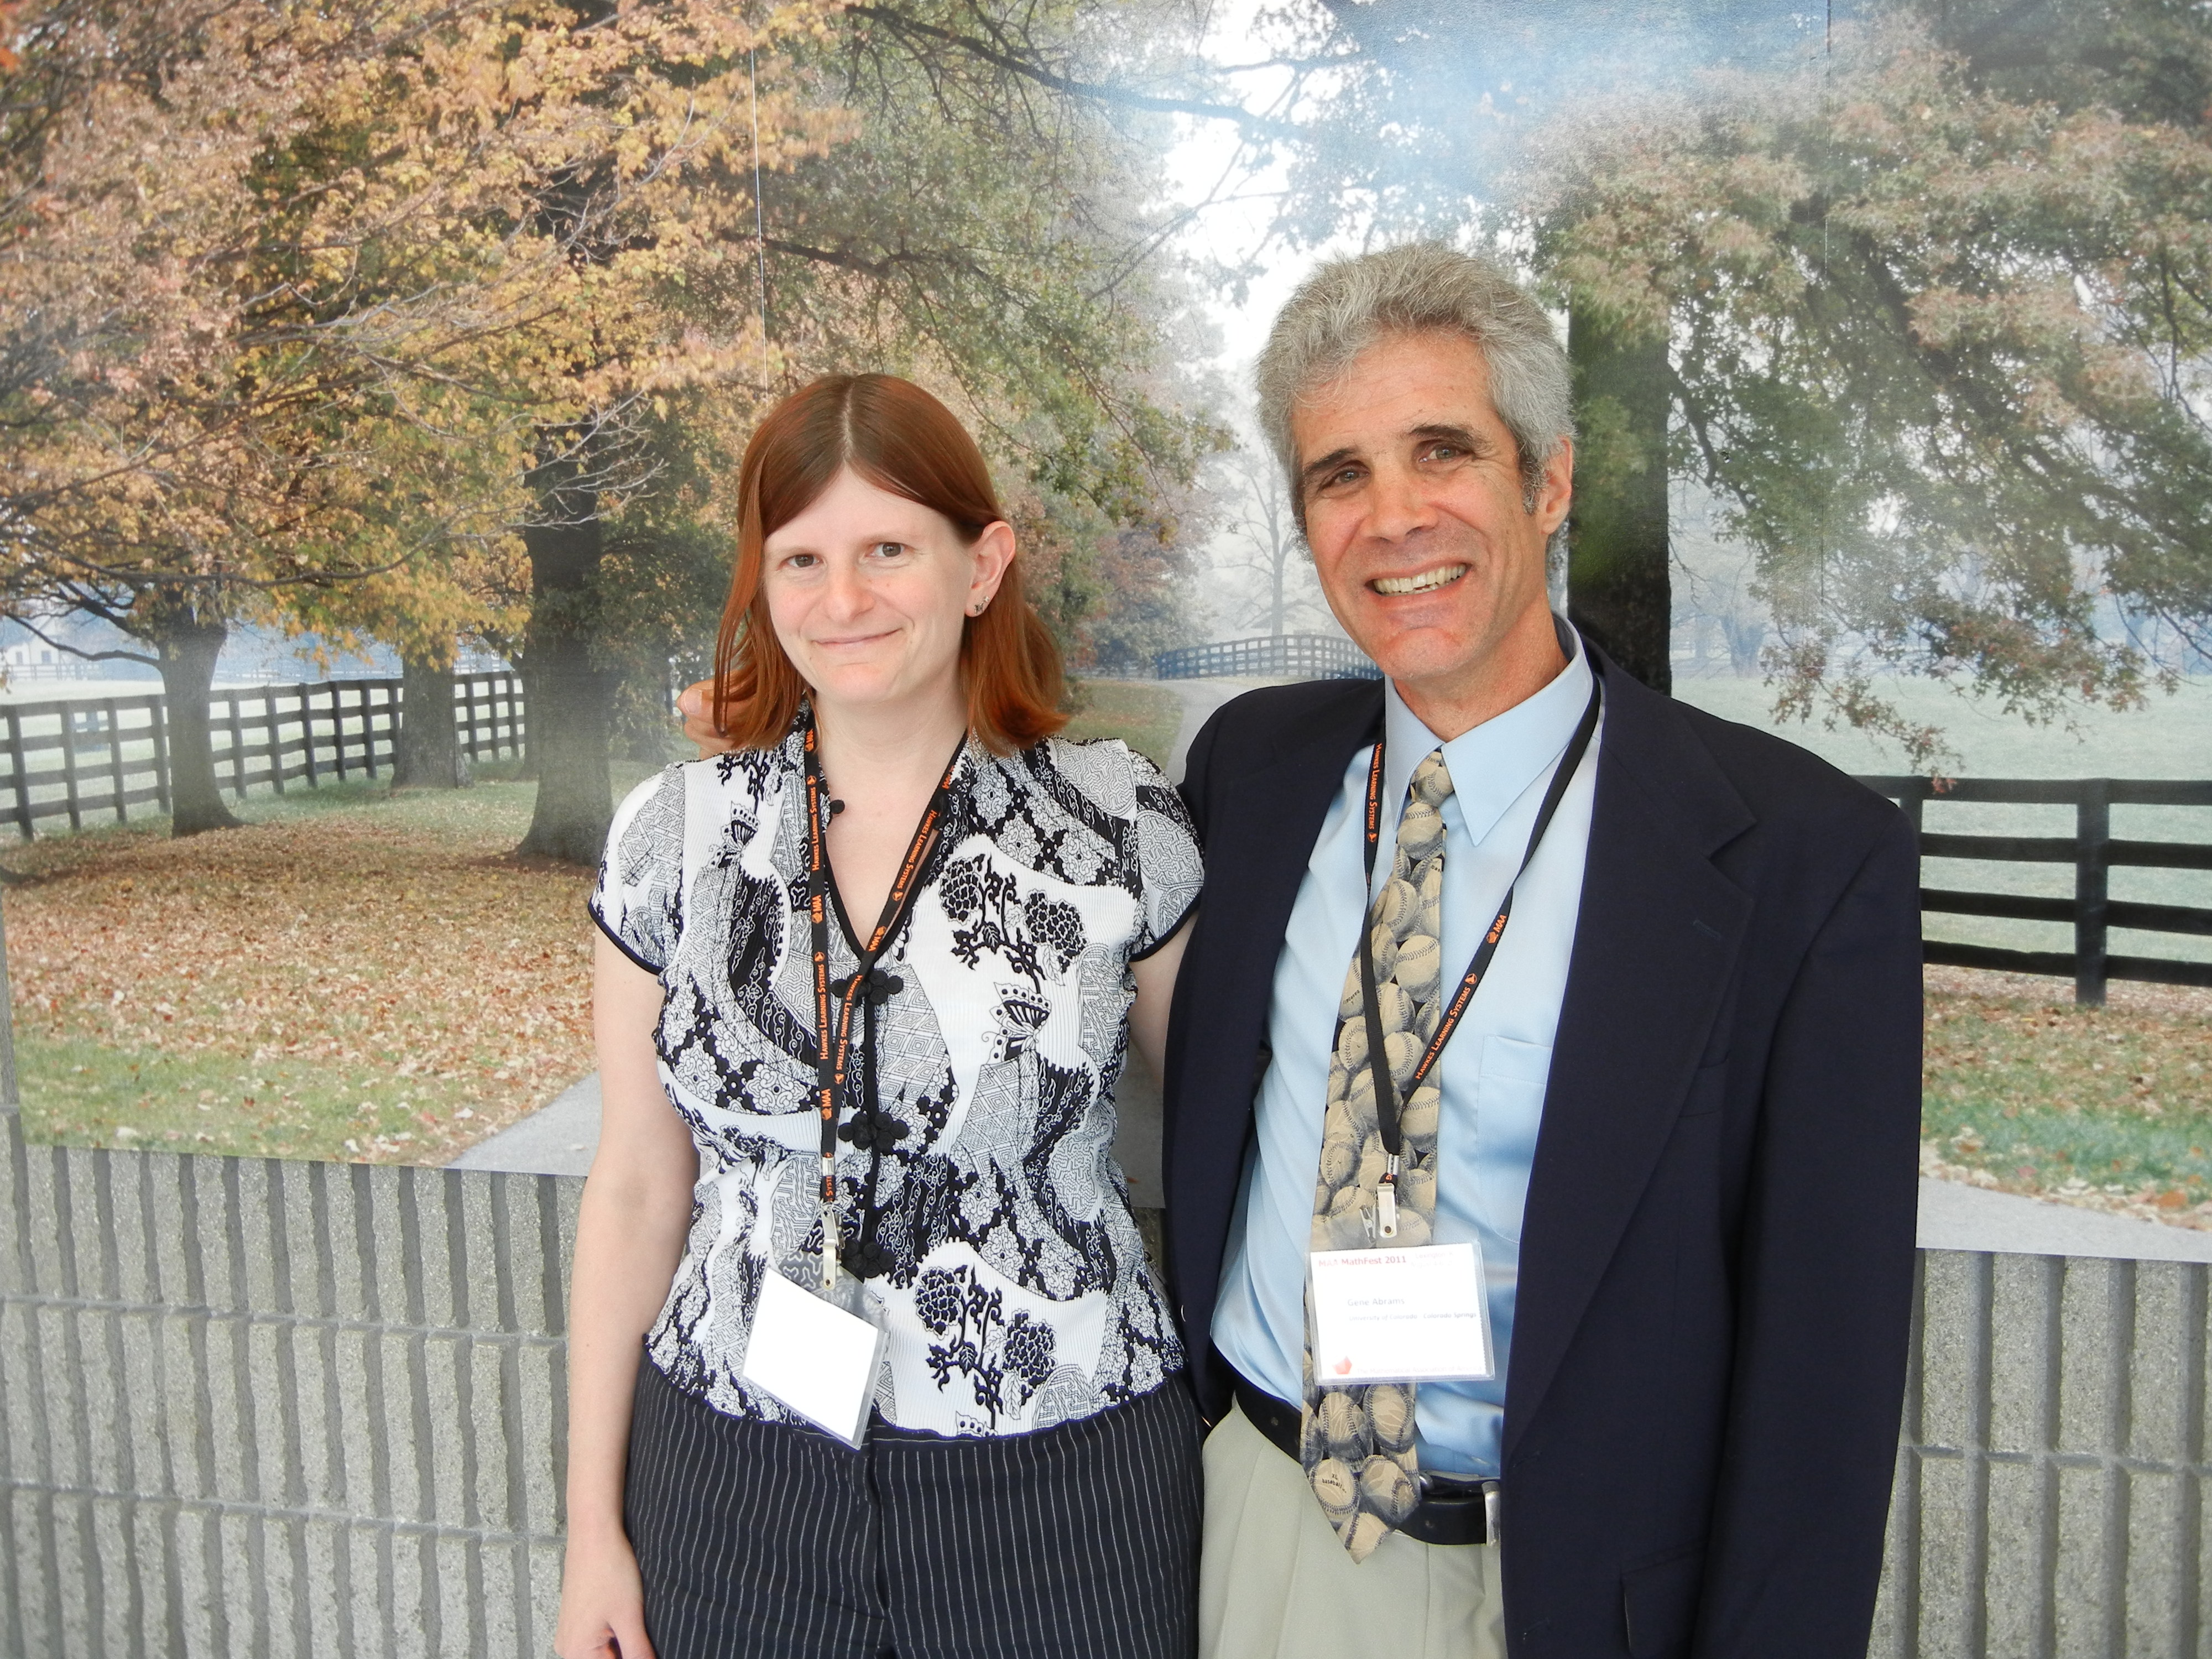 PLU Associate Professor of Mathematics Jessica Sklar, right, and co-author Gene Abrams (University of Colorado-Colorado Springs), after receiving their award at the MAA MathFest at the University of Kentucky in 2011. (Photo courtesy Jessica Sklar) 